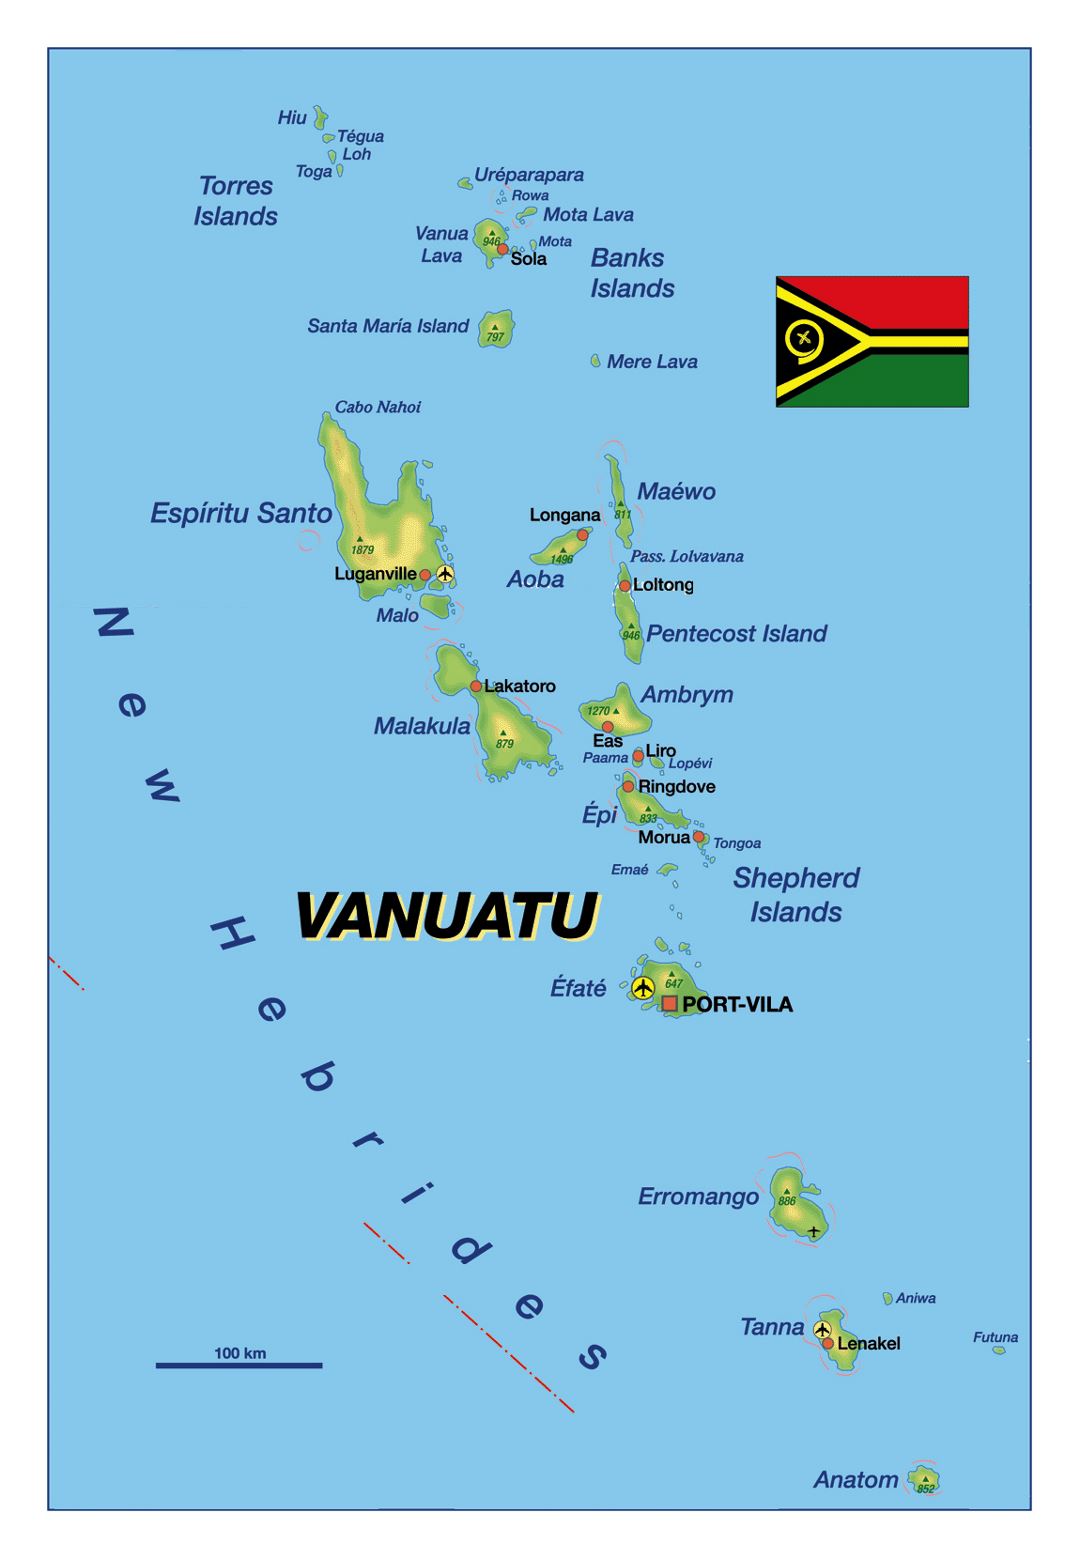 Detailed elevation map of Vanuatu with major cities and airports